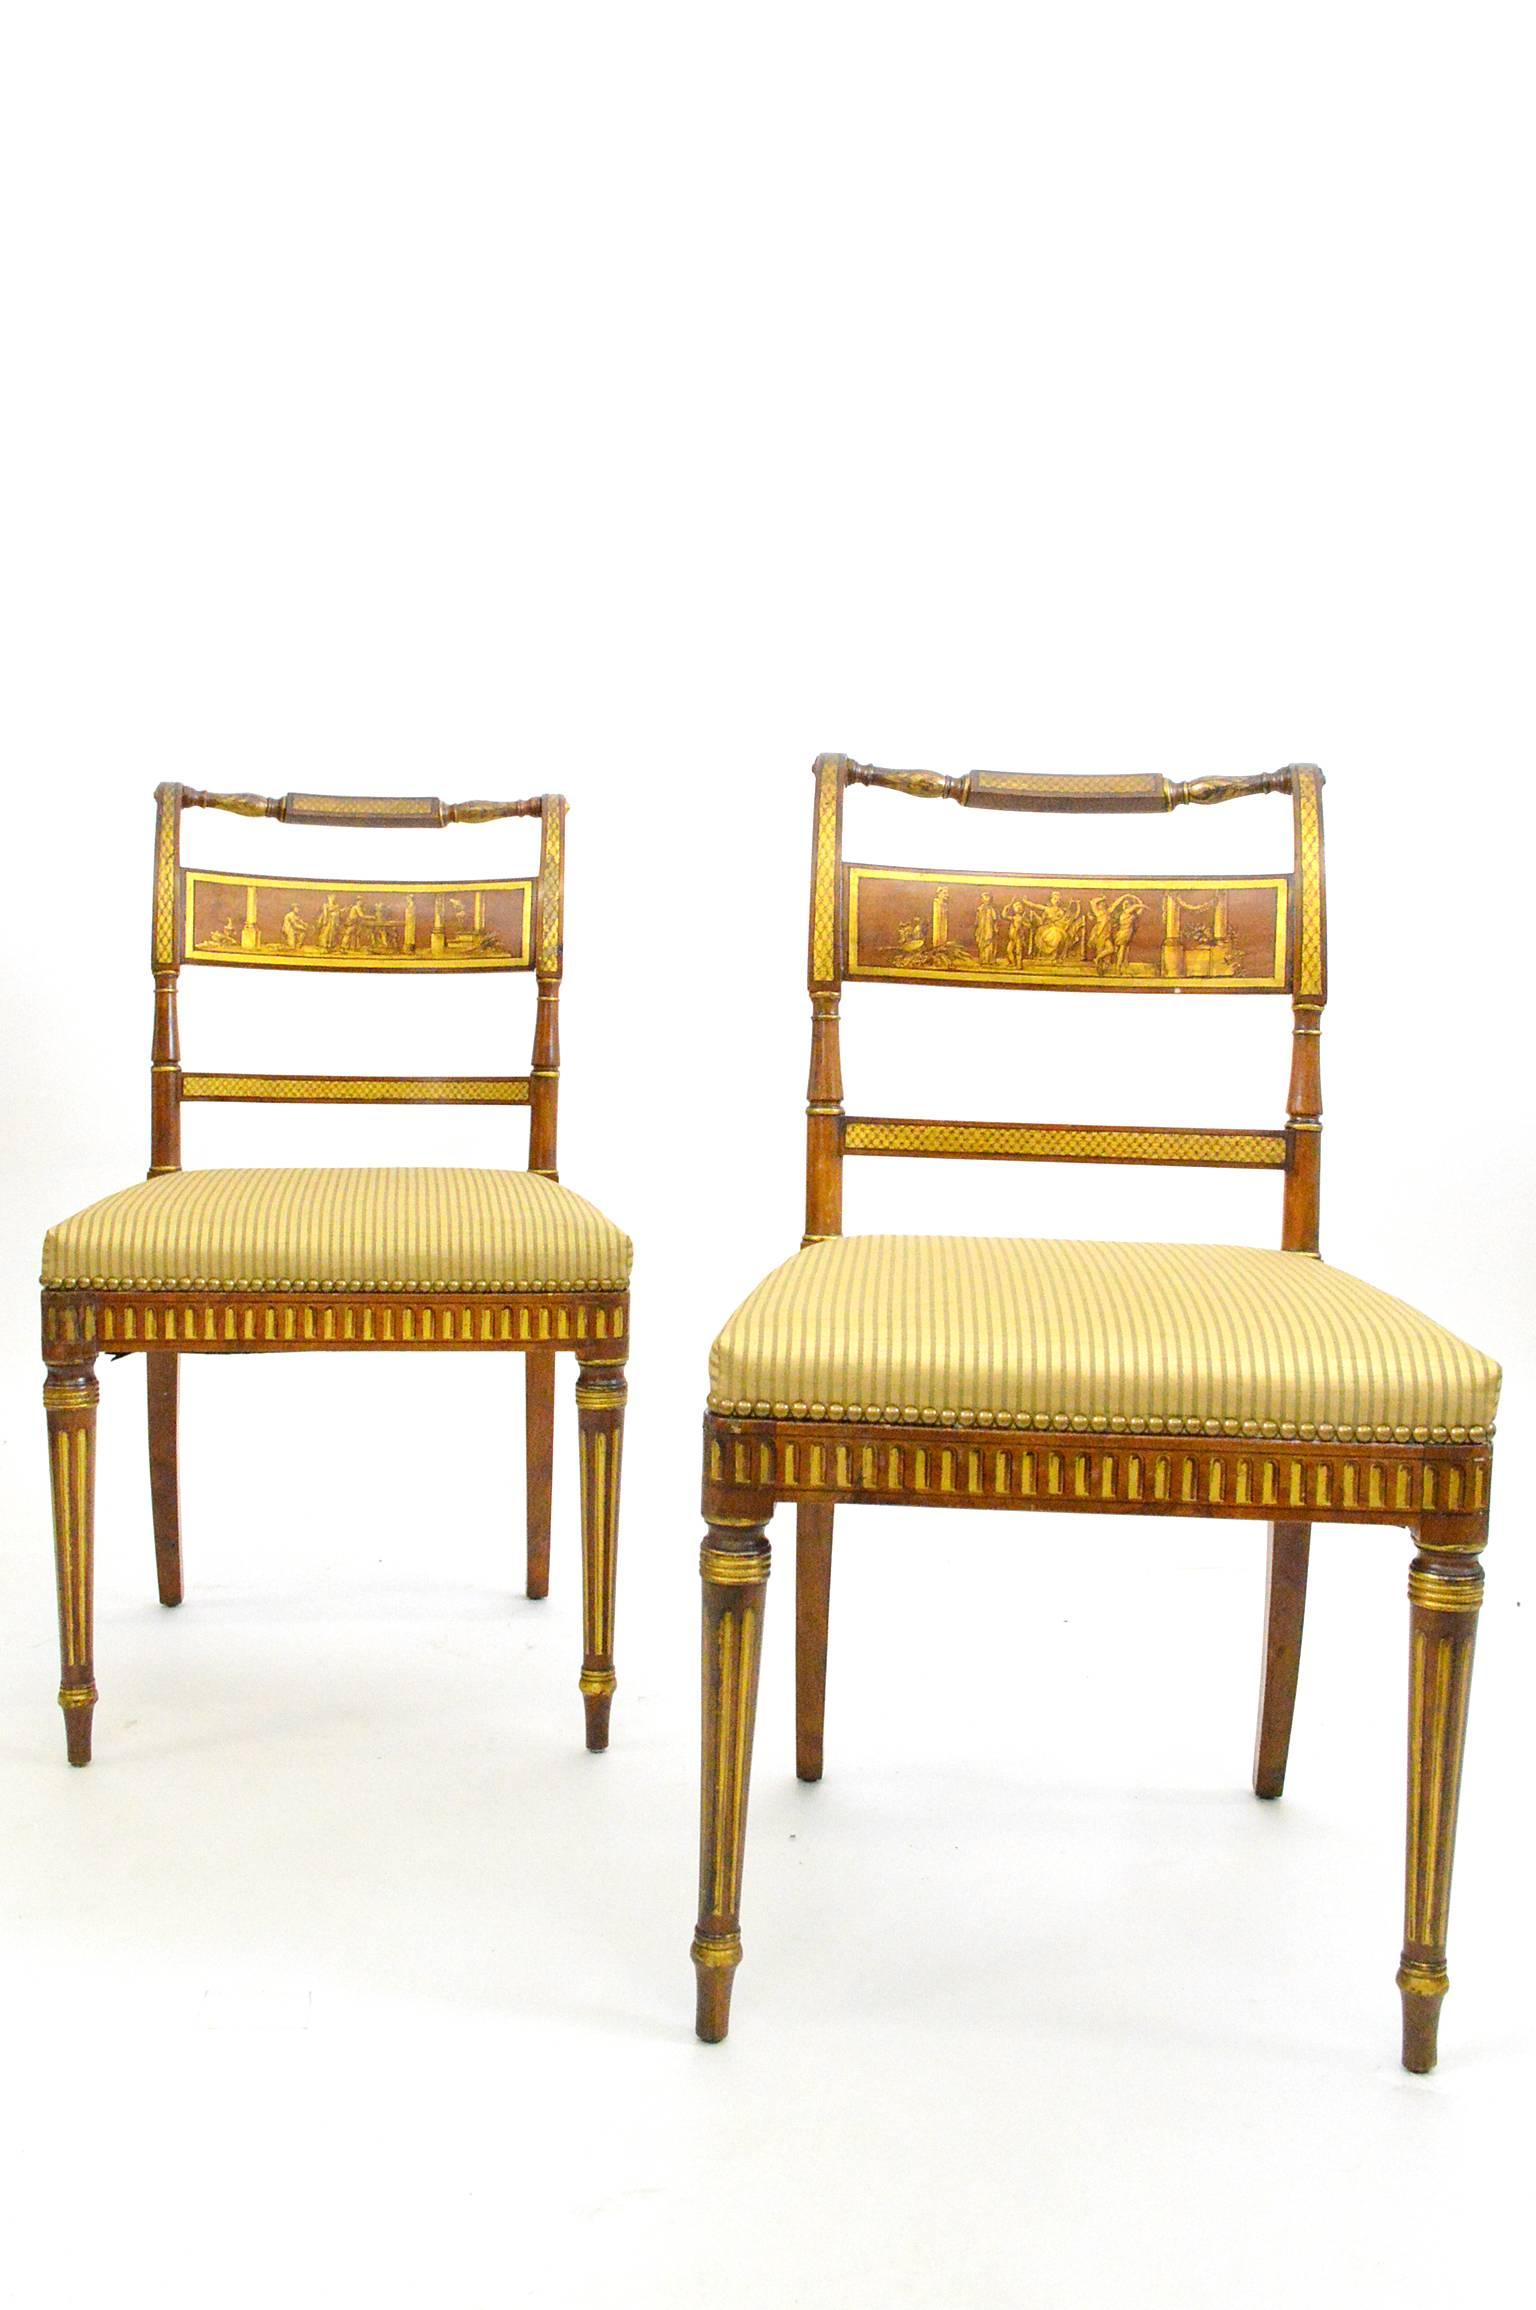 Set of six Regency chairs in original finish with paint decoration.